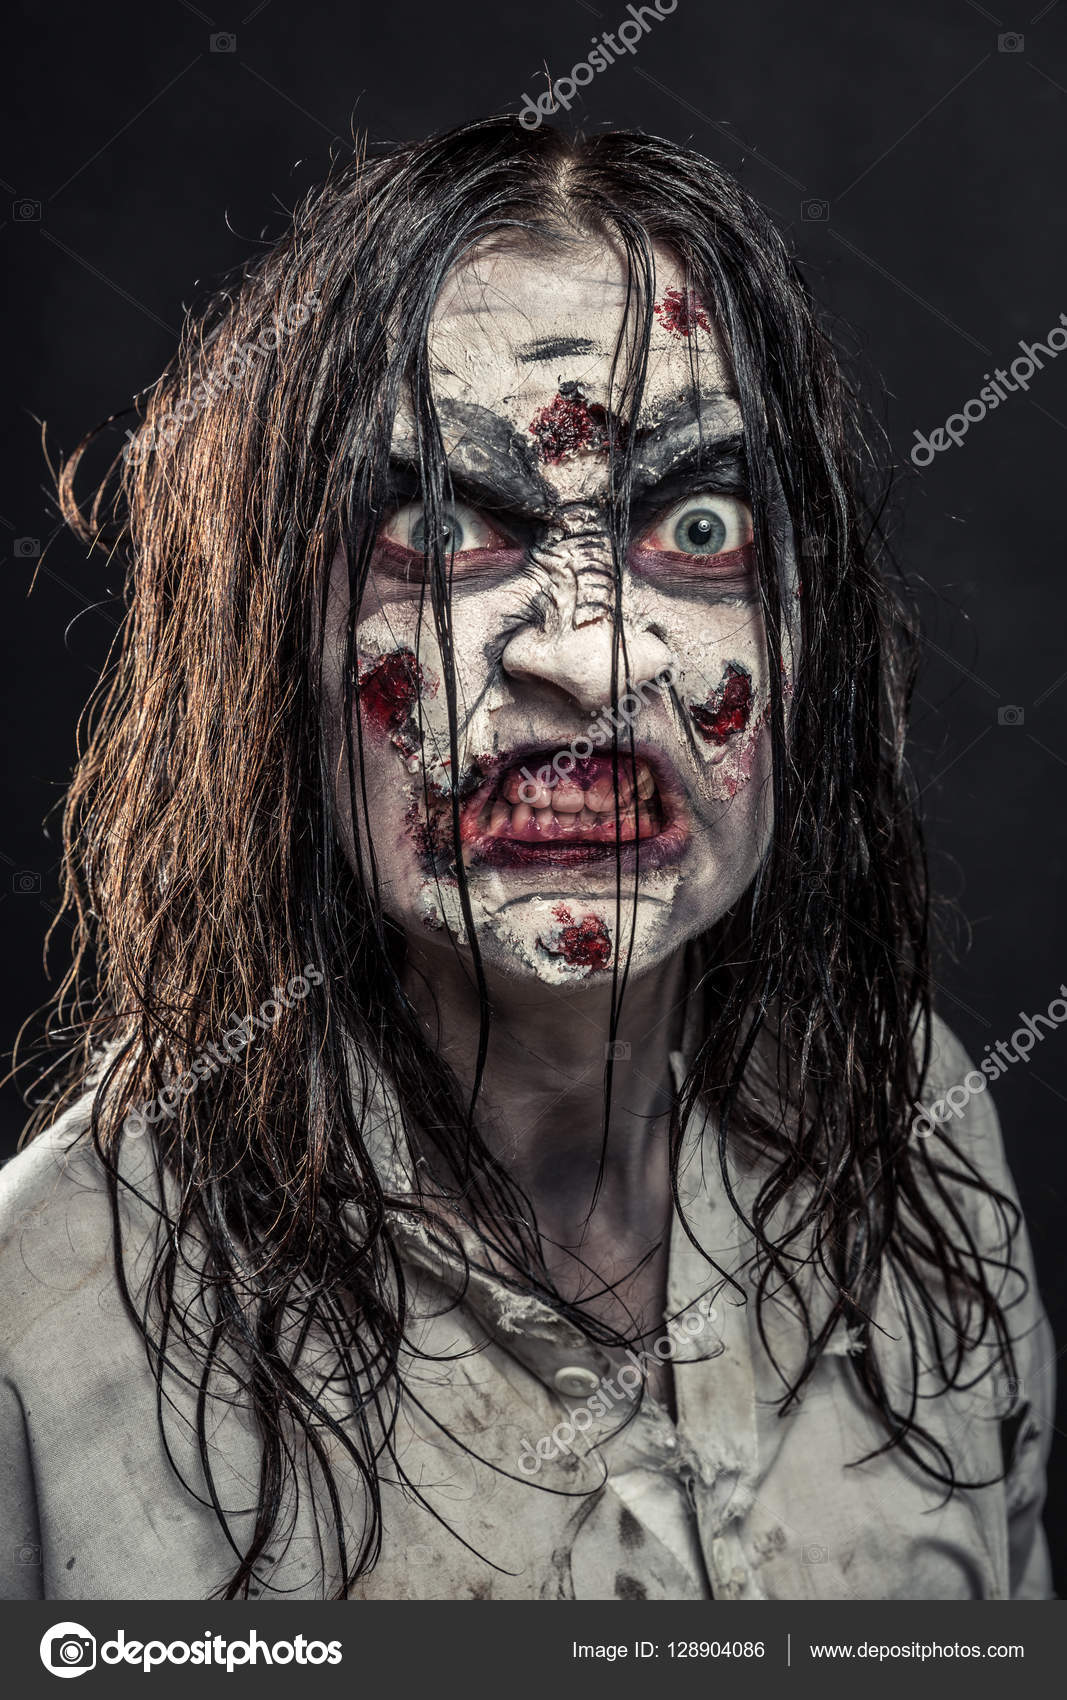 Portrait Of A Scared Girl With Blood On Her Face Looking At Camera